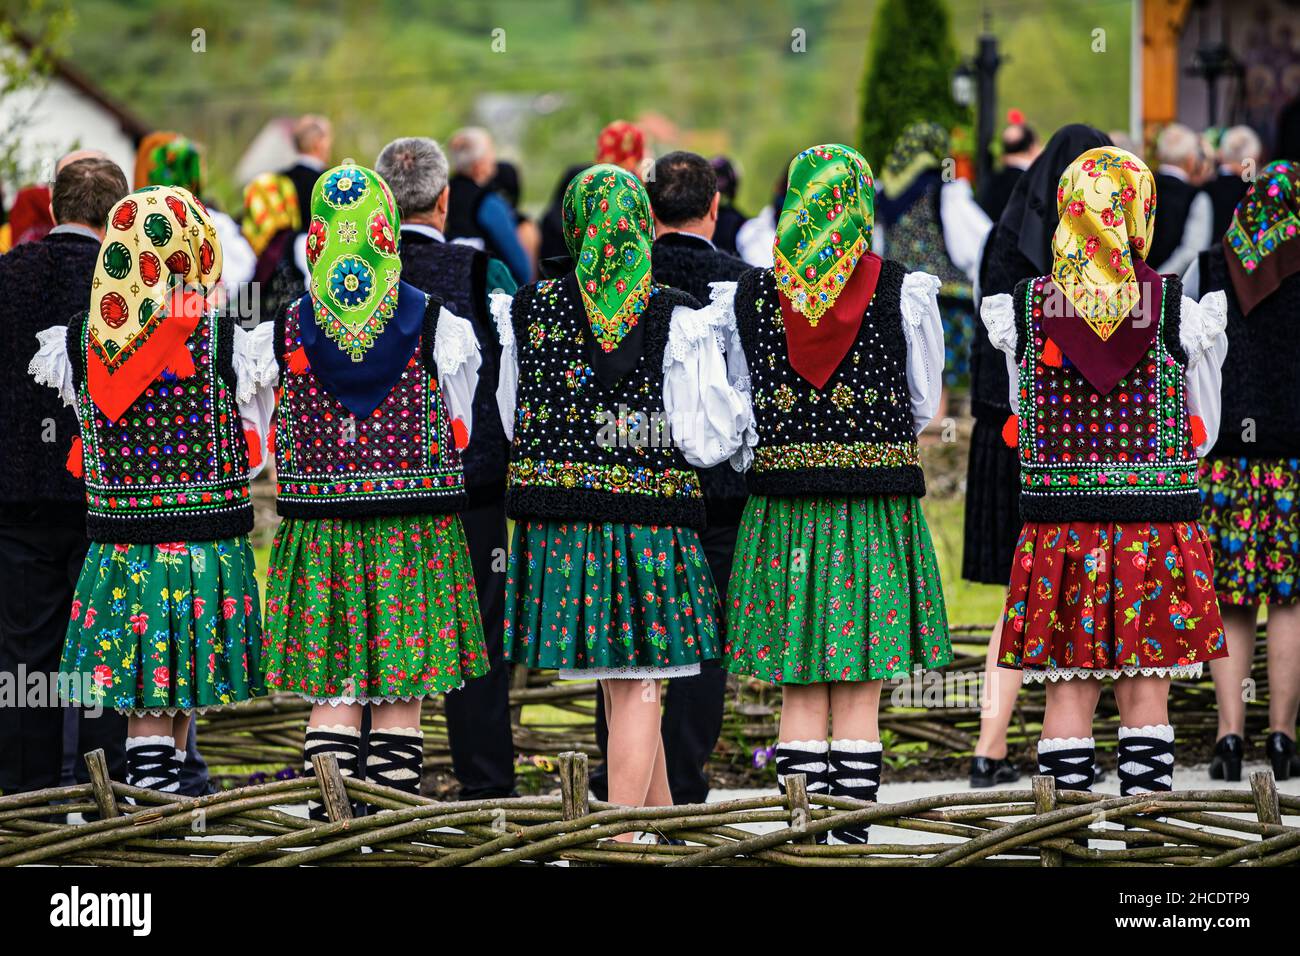 Row of traditional costumes in the northern part of Romania. Photo taken on 16th of May 2021 Ieud town, Maramures county, Romania. Stock Photo